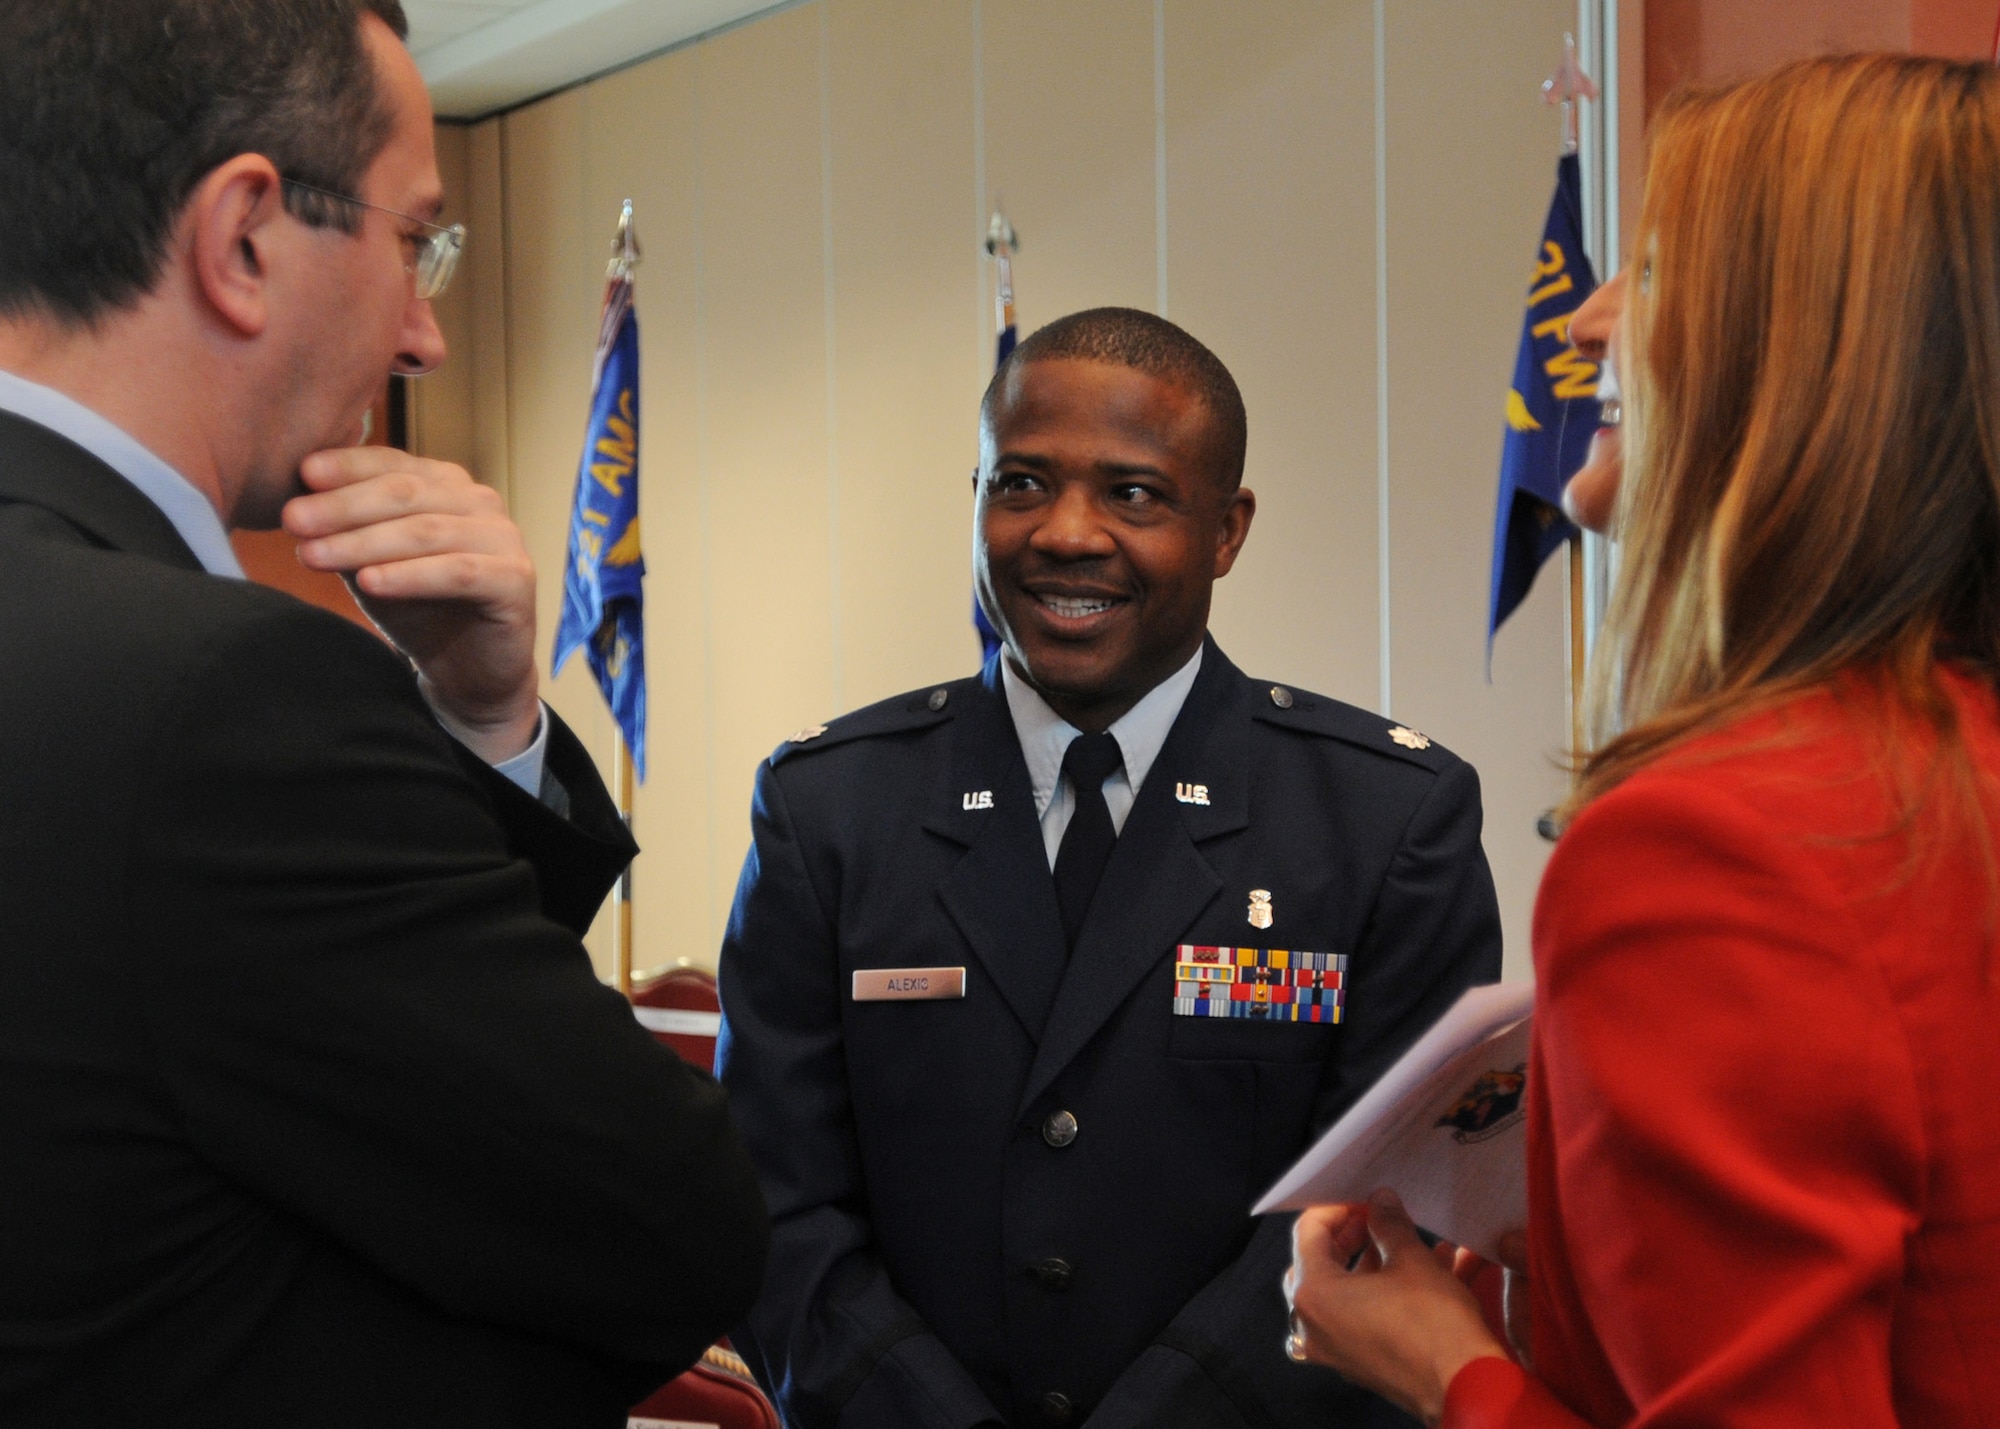 Lt. Col. Martin Alexis, 31st Aerospace Medicine Squadron deputy commander, mingles with Dr. Luca Balestreri and his wife Sandra, following Mr. Balestreri's induction into the 31st Fighter Wing Honorary Squadron Commander Program May 8, 2009, at Aviano Air Base, Italy.  Mr. Balestreri is the new HSC for the 31st AMDS and is a radiologist with the Centro di Riferimento Oncologico.  (U.S. Air Force photo/Staff Sgt. Patrick Dixon)